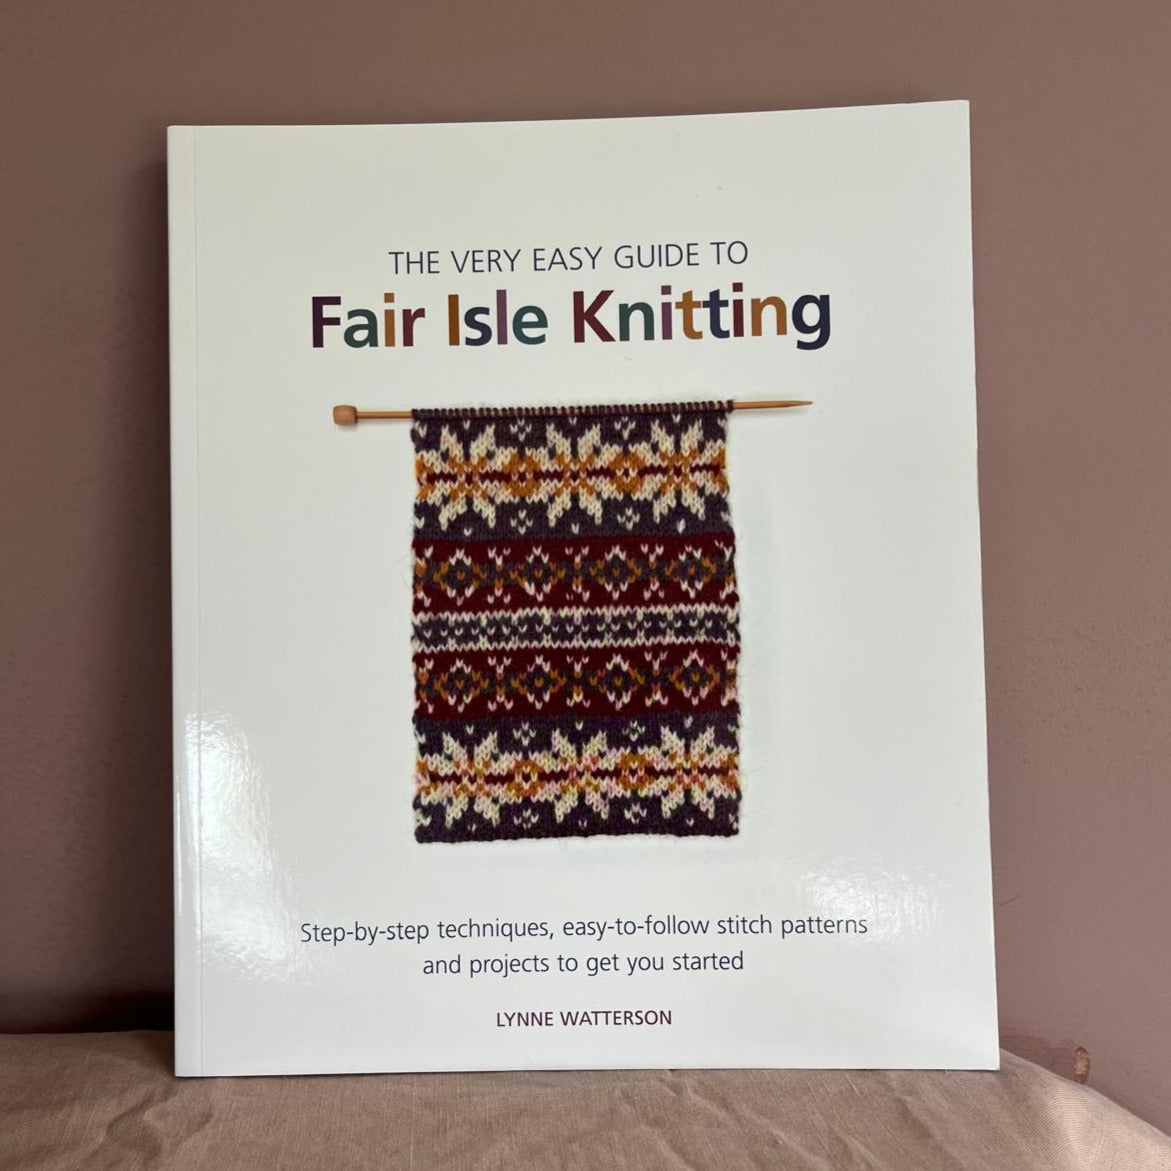 The Very Easy Guide to Fair Isle Knitting  by Lynne Watterson